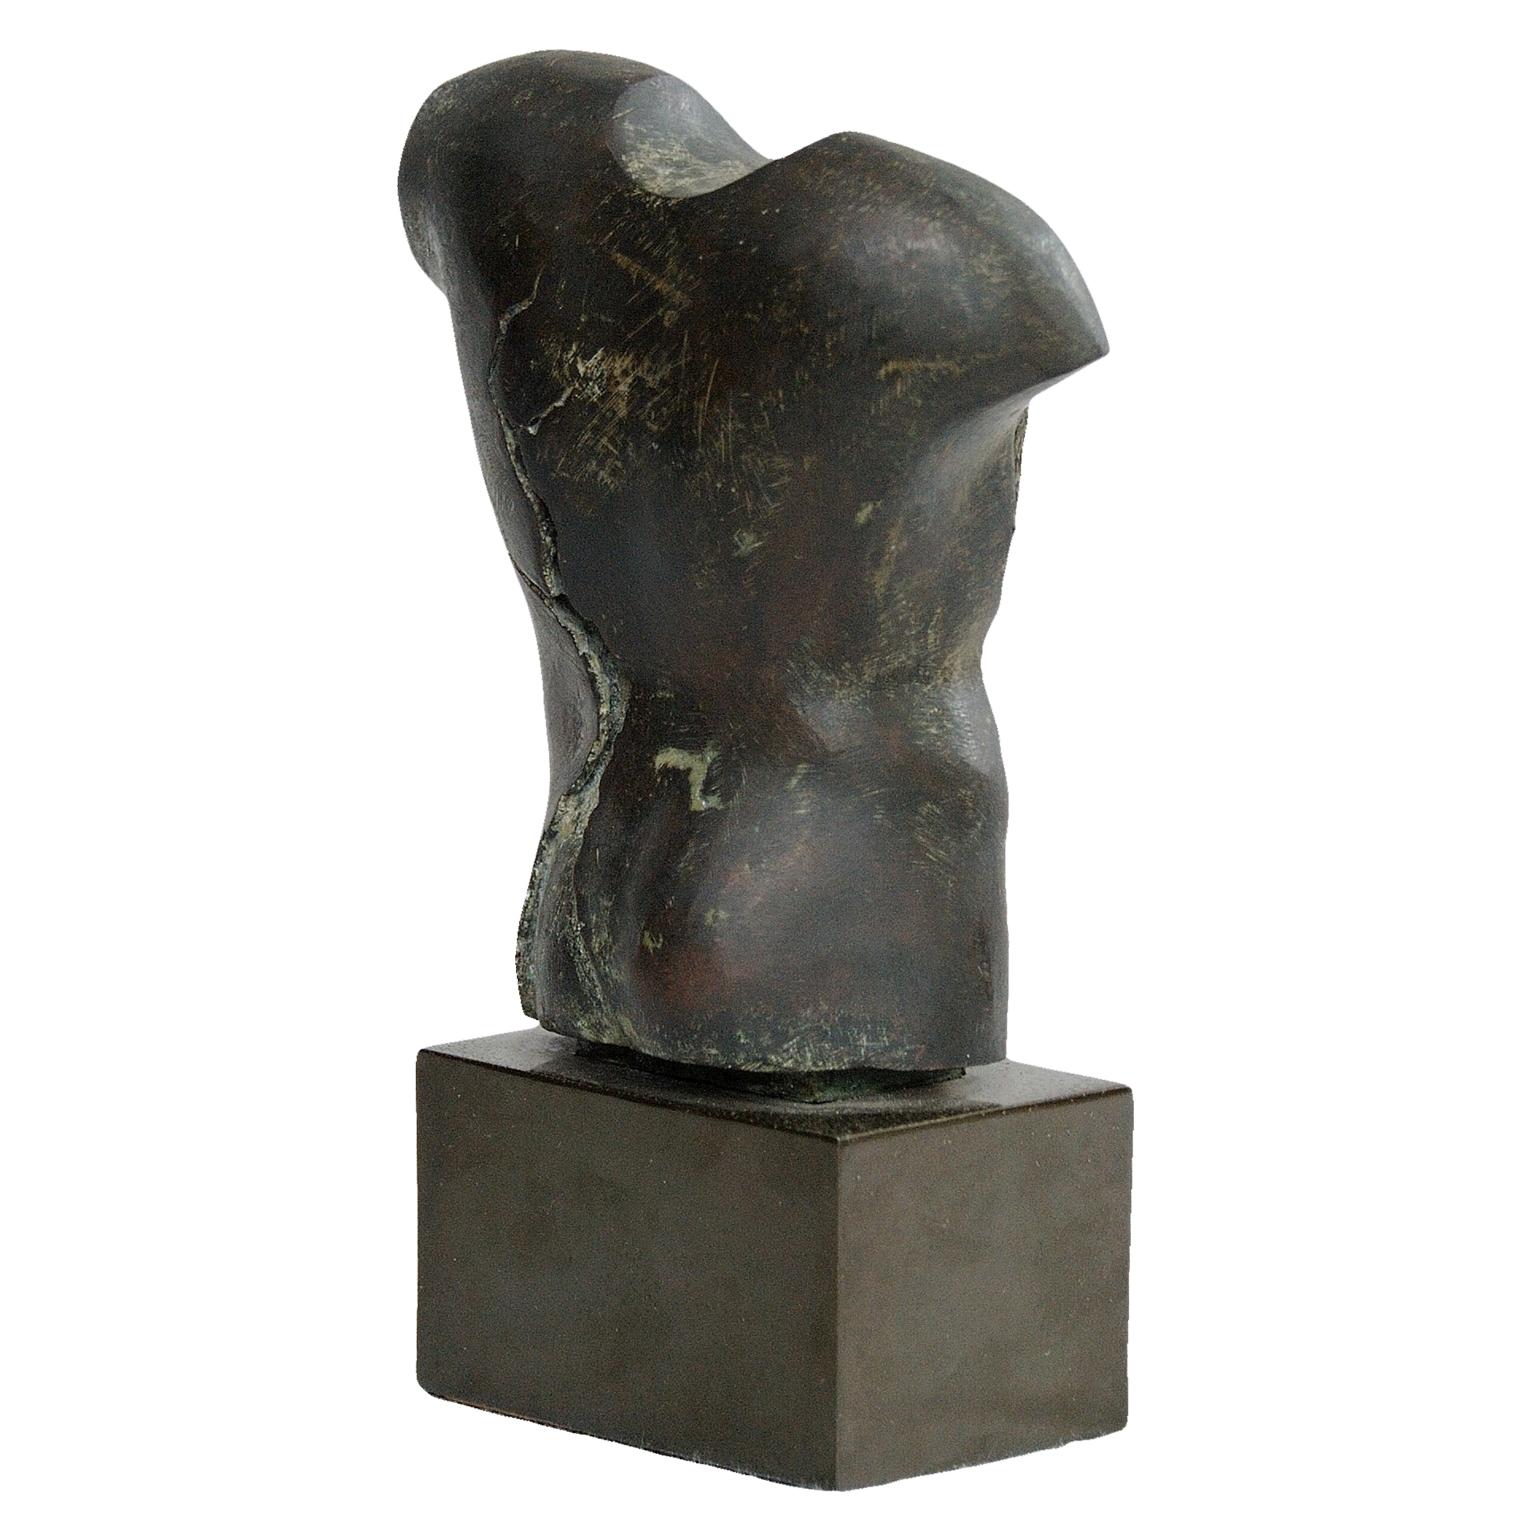 This is a lovely polished brass mounted bronze 'Torso' by the celebrated Spanish sculptor Carlos Garcia Muela (1936-2013).
Signed 127/225 Muela, circa 1970.